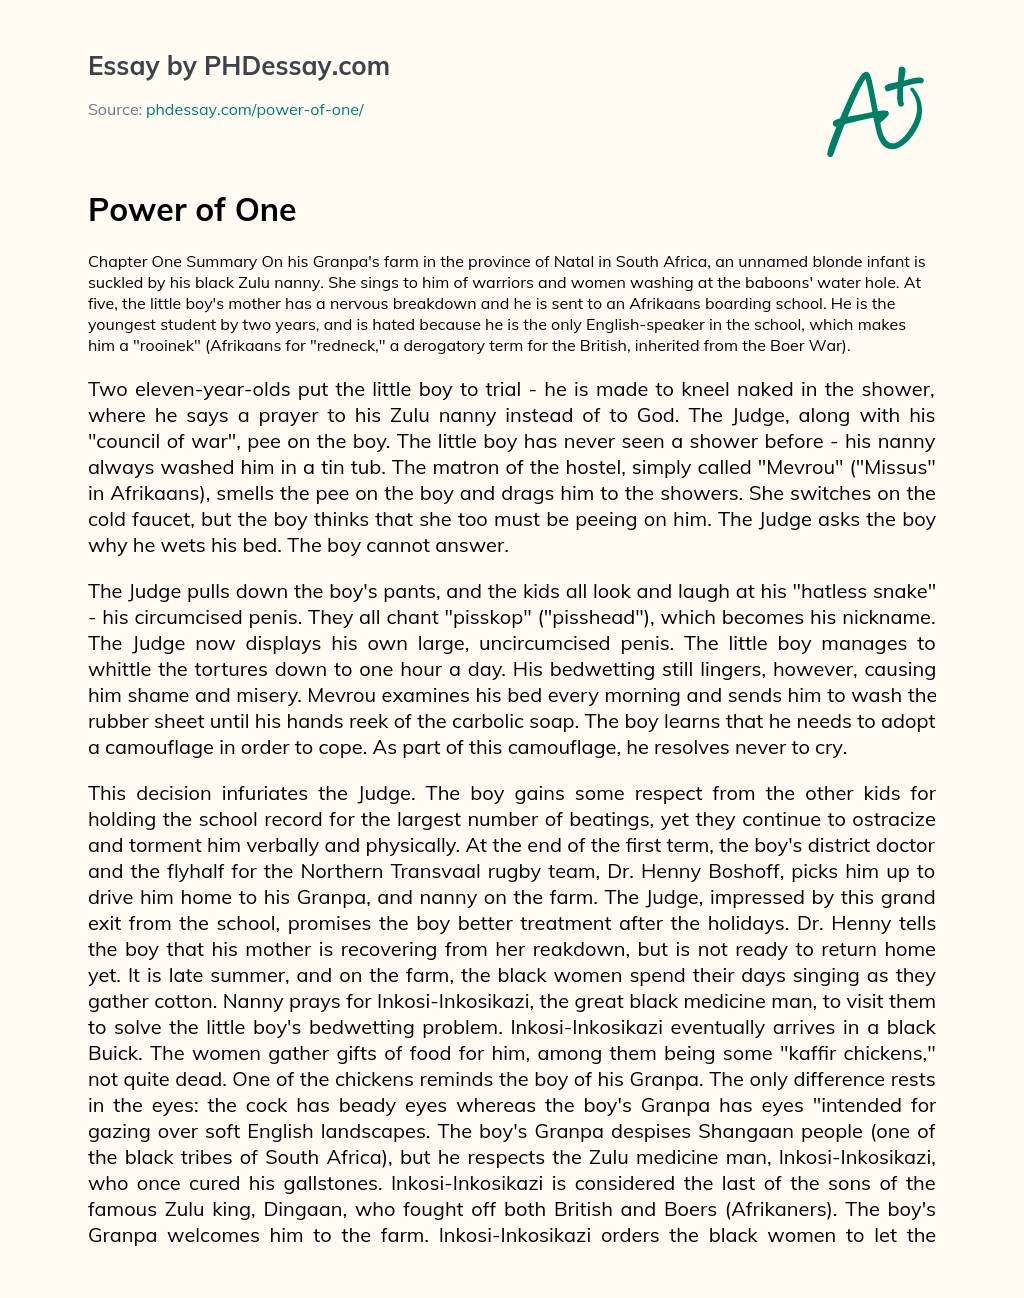 Power of One essay